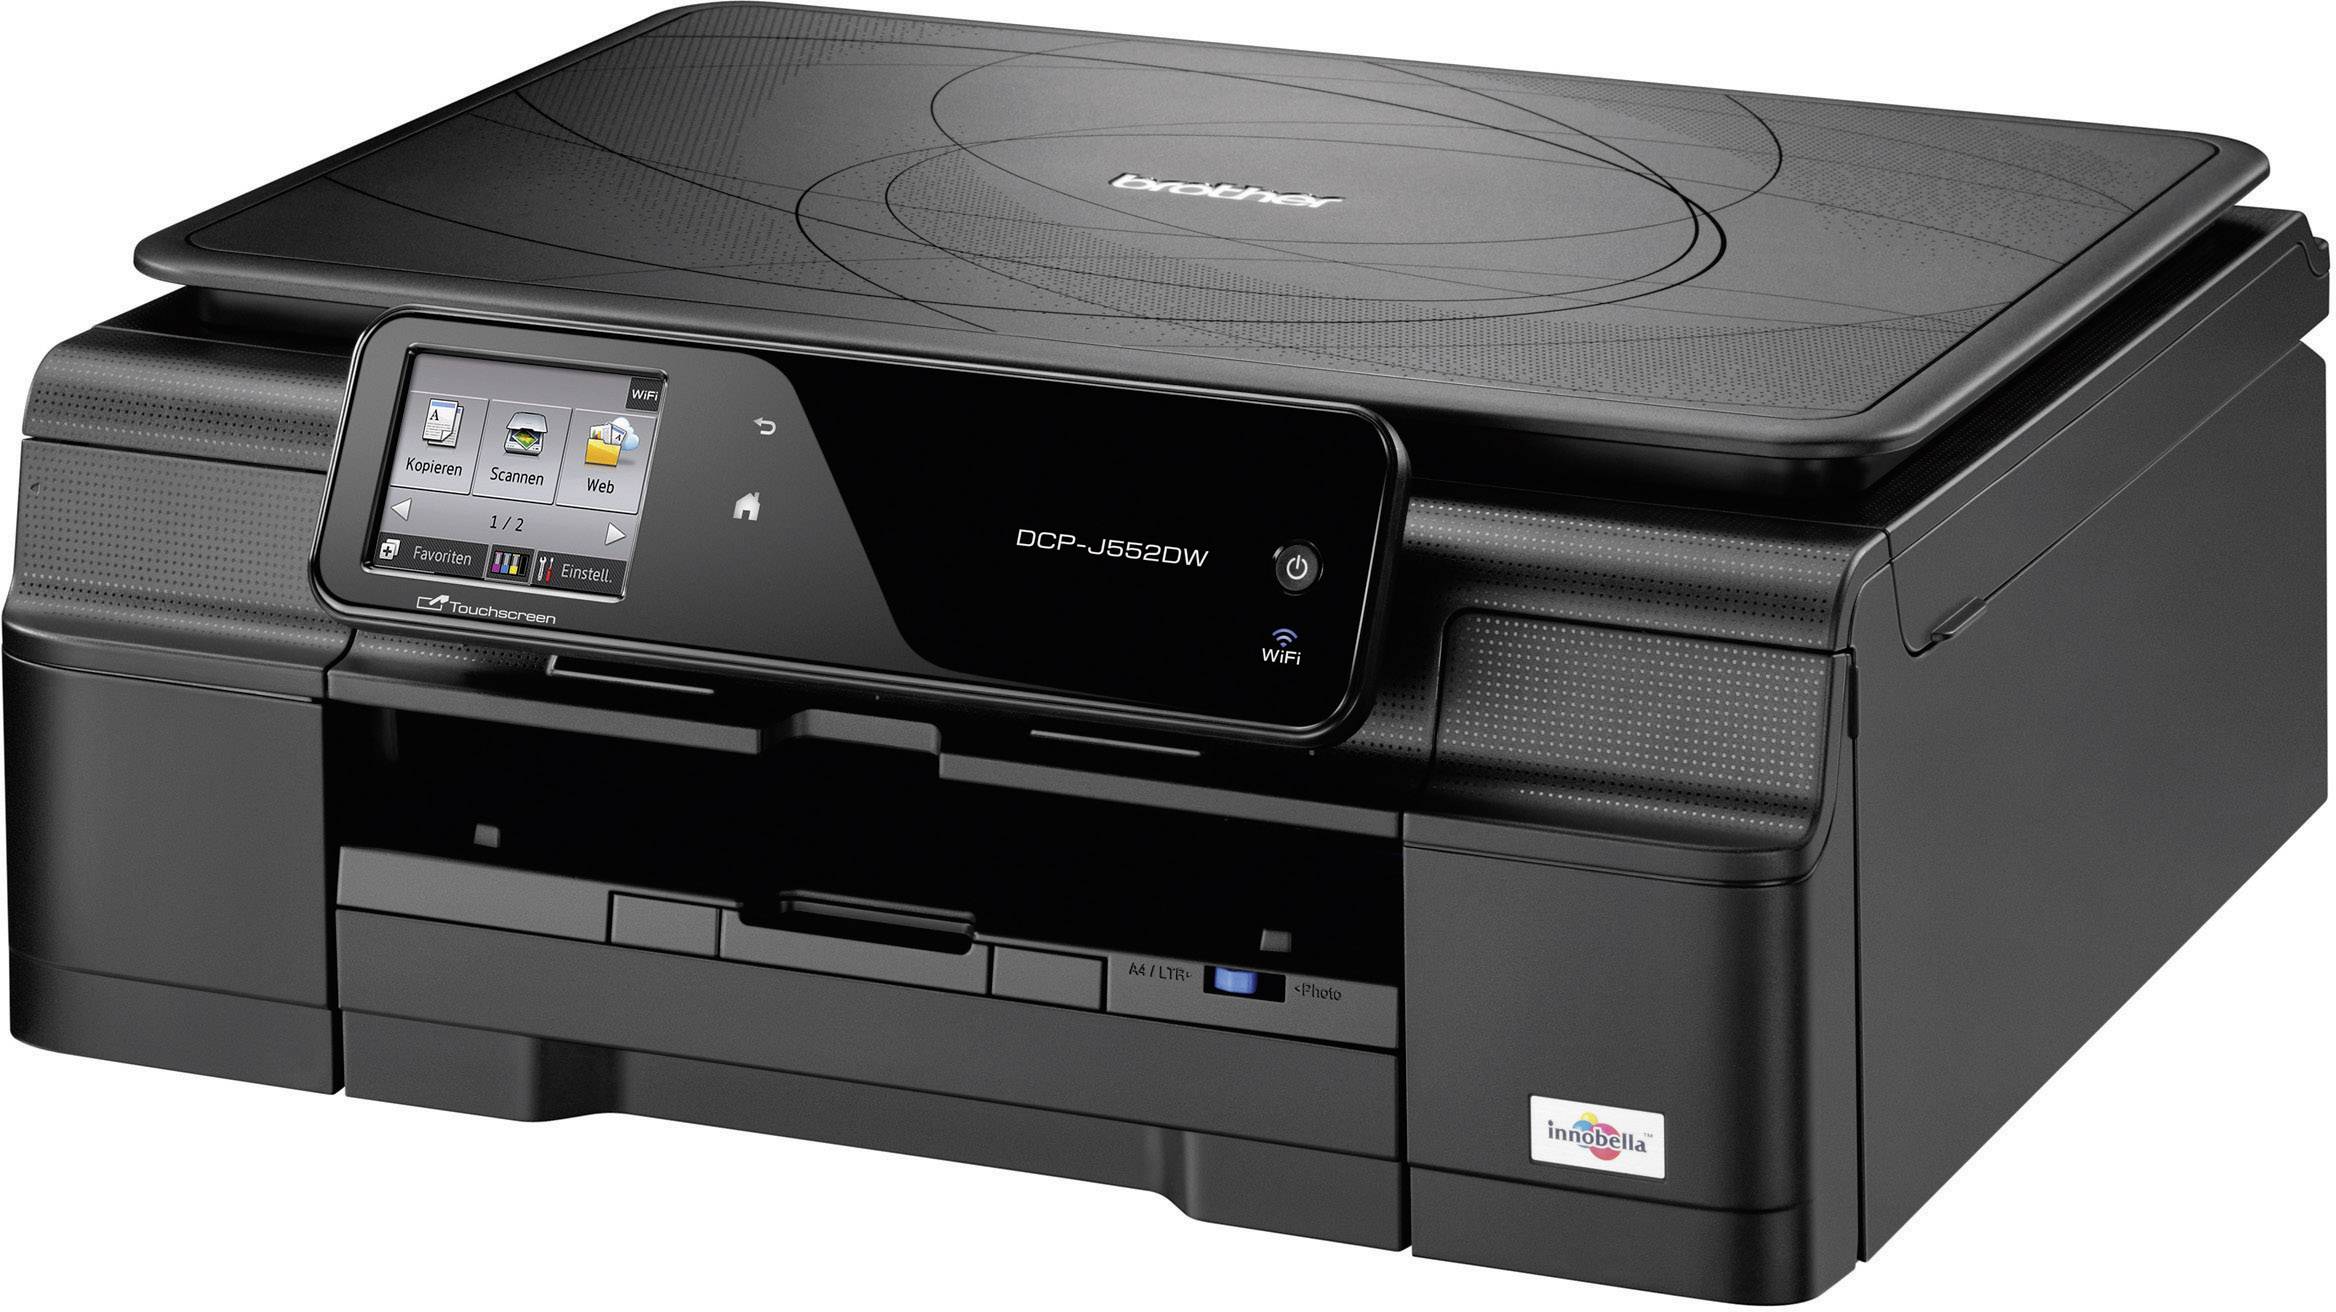 Brother dcp 10. МФУ brother DCP-j552dw. Brother DCP j515w. Принтер brother DCP-l6600dw. МФУ brother MFC-8520dn.